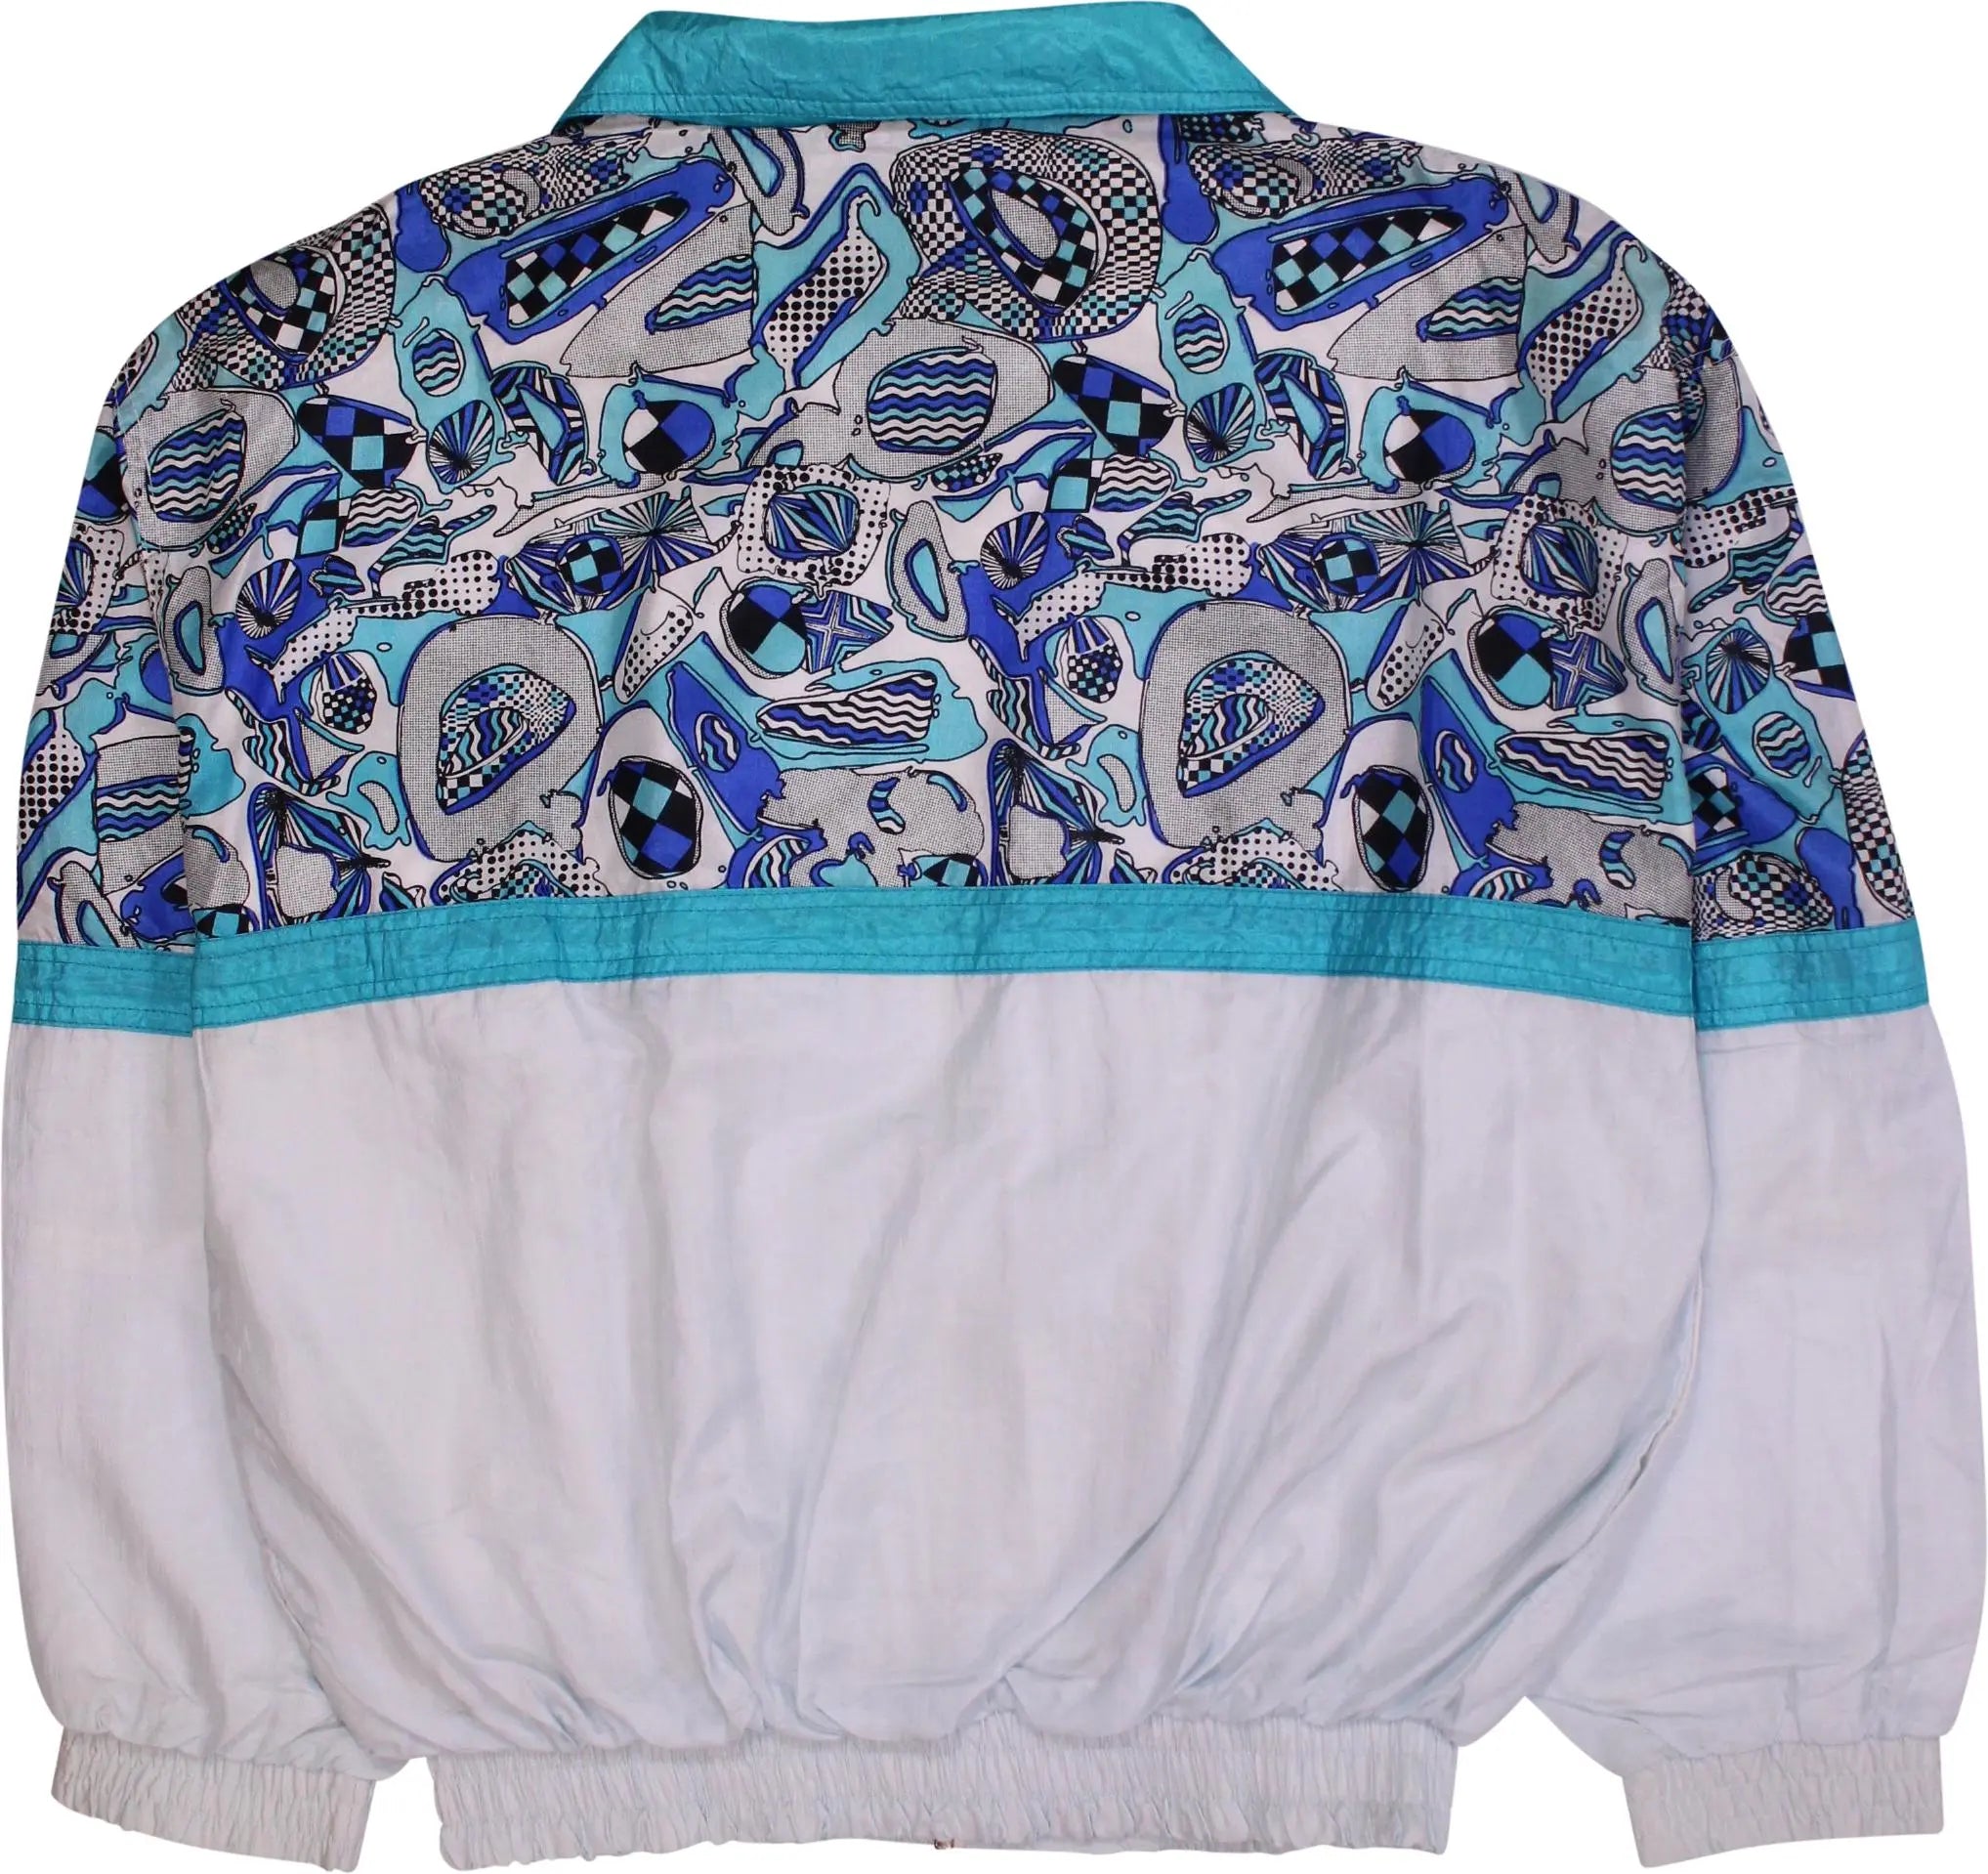 Unknown - 80s/90s Dolphin Windbreaker- ThriftTale.com - Vintage and second handclothing